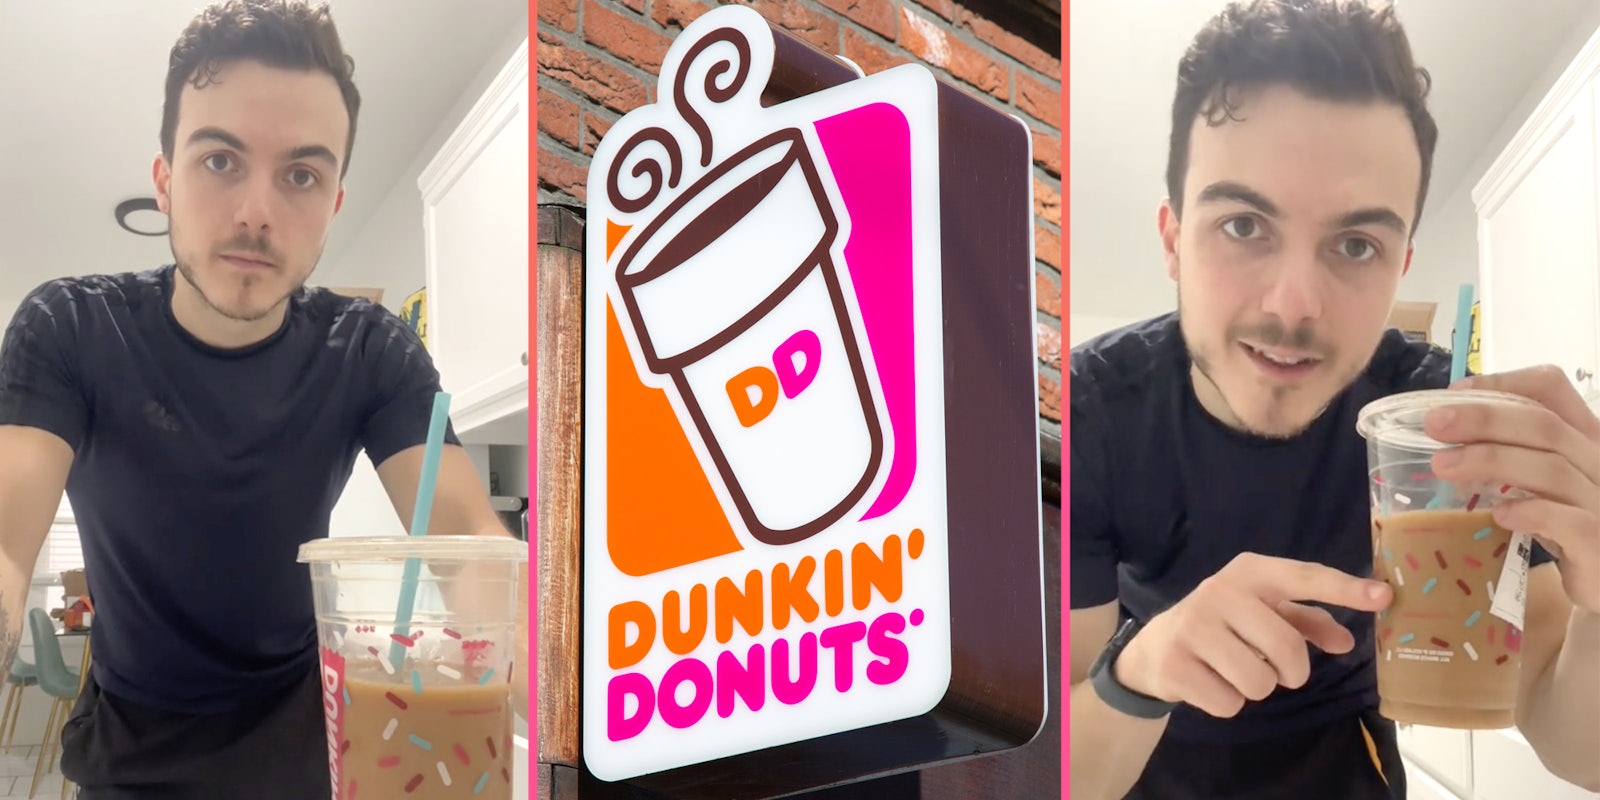 Man talking with coffee(l+r), Dunkin Donuts sign(c)